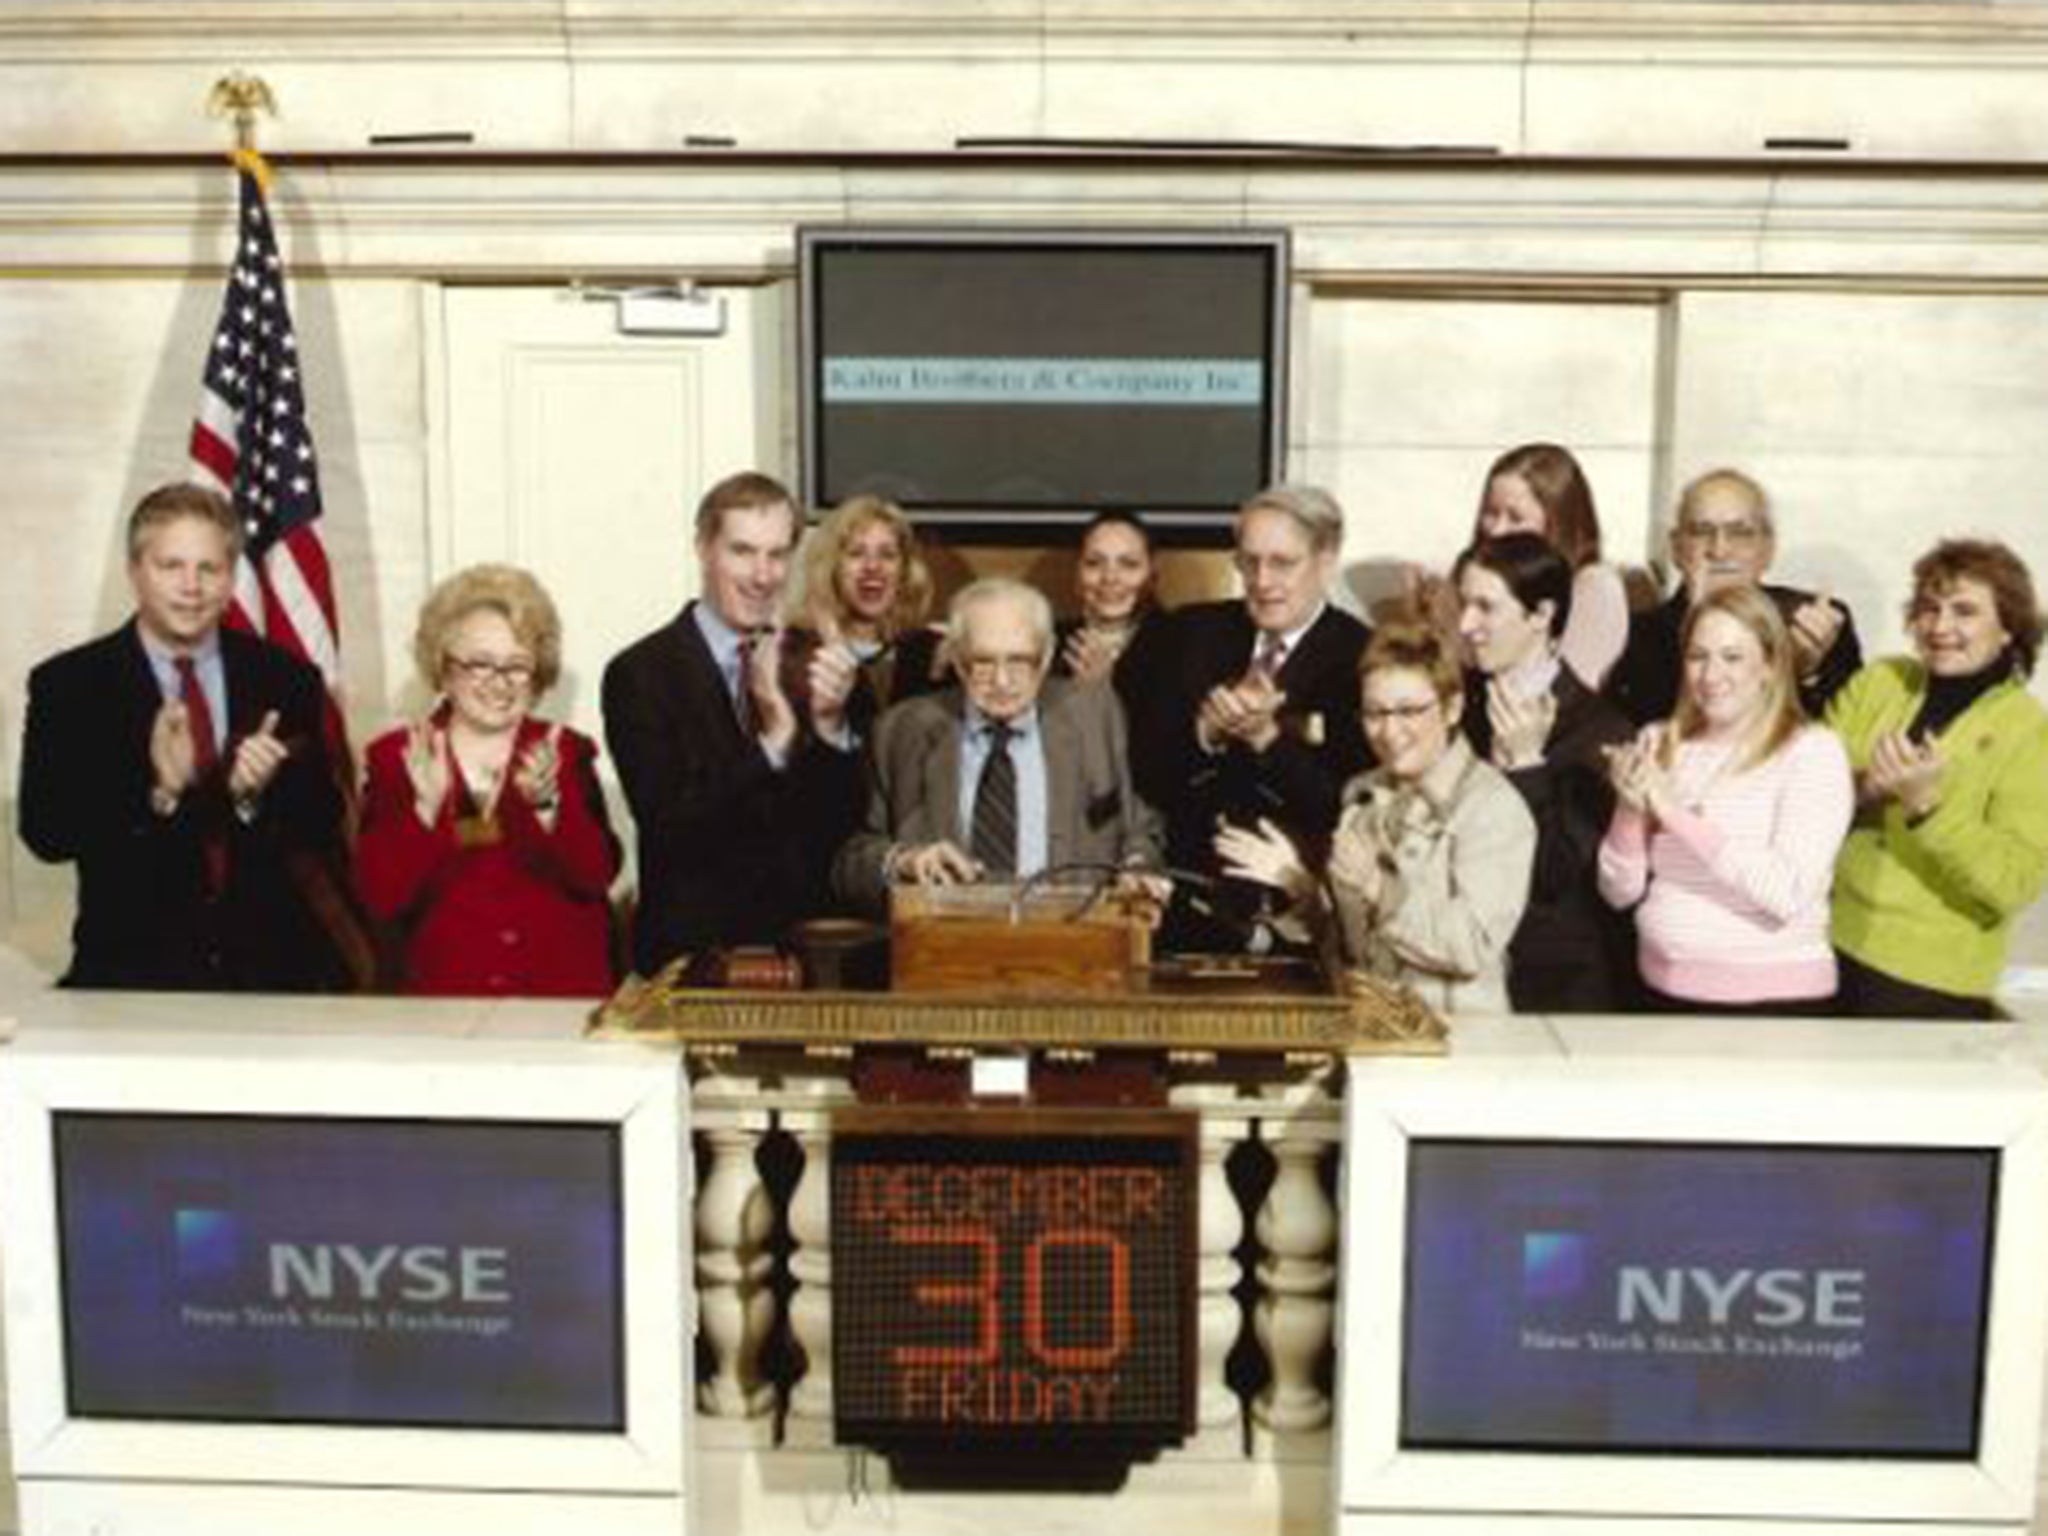 Kahn rings the opening bell on the New York Stock Exchange in 2005 to mark his 100th birthday